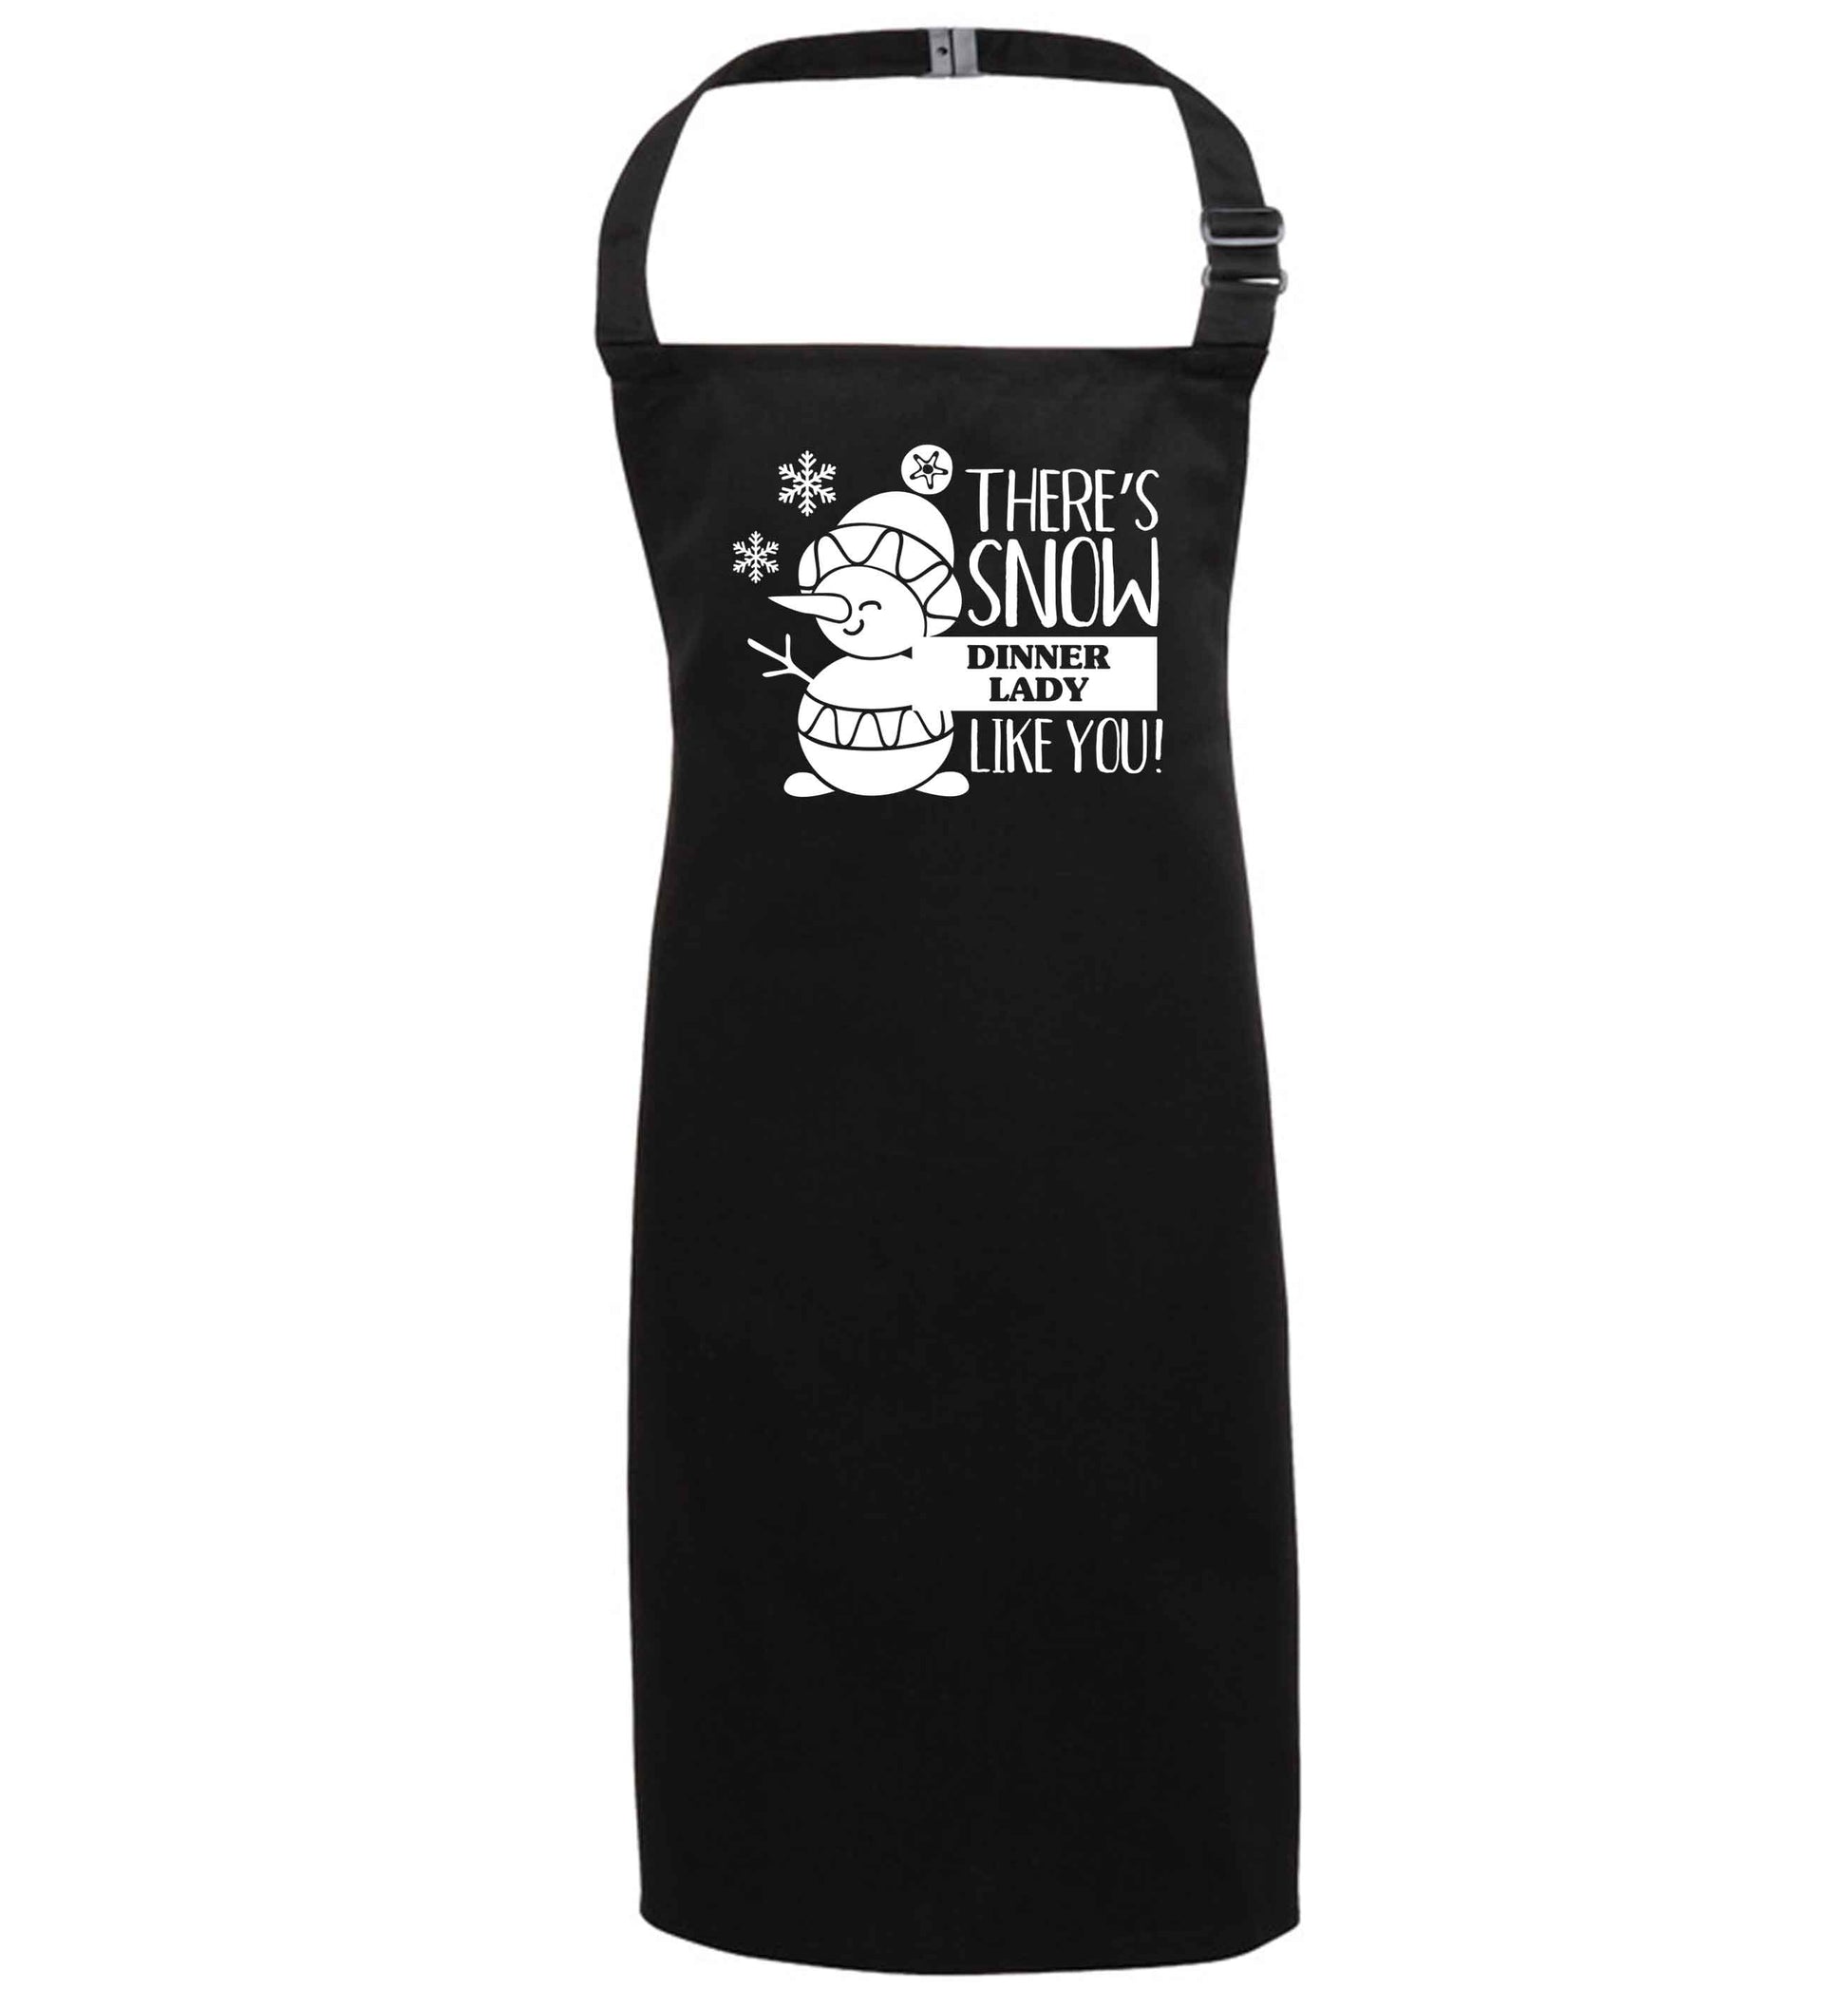 There's snow dinner lady like you black apron 7-10 years